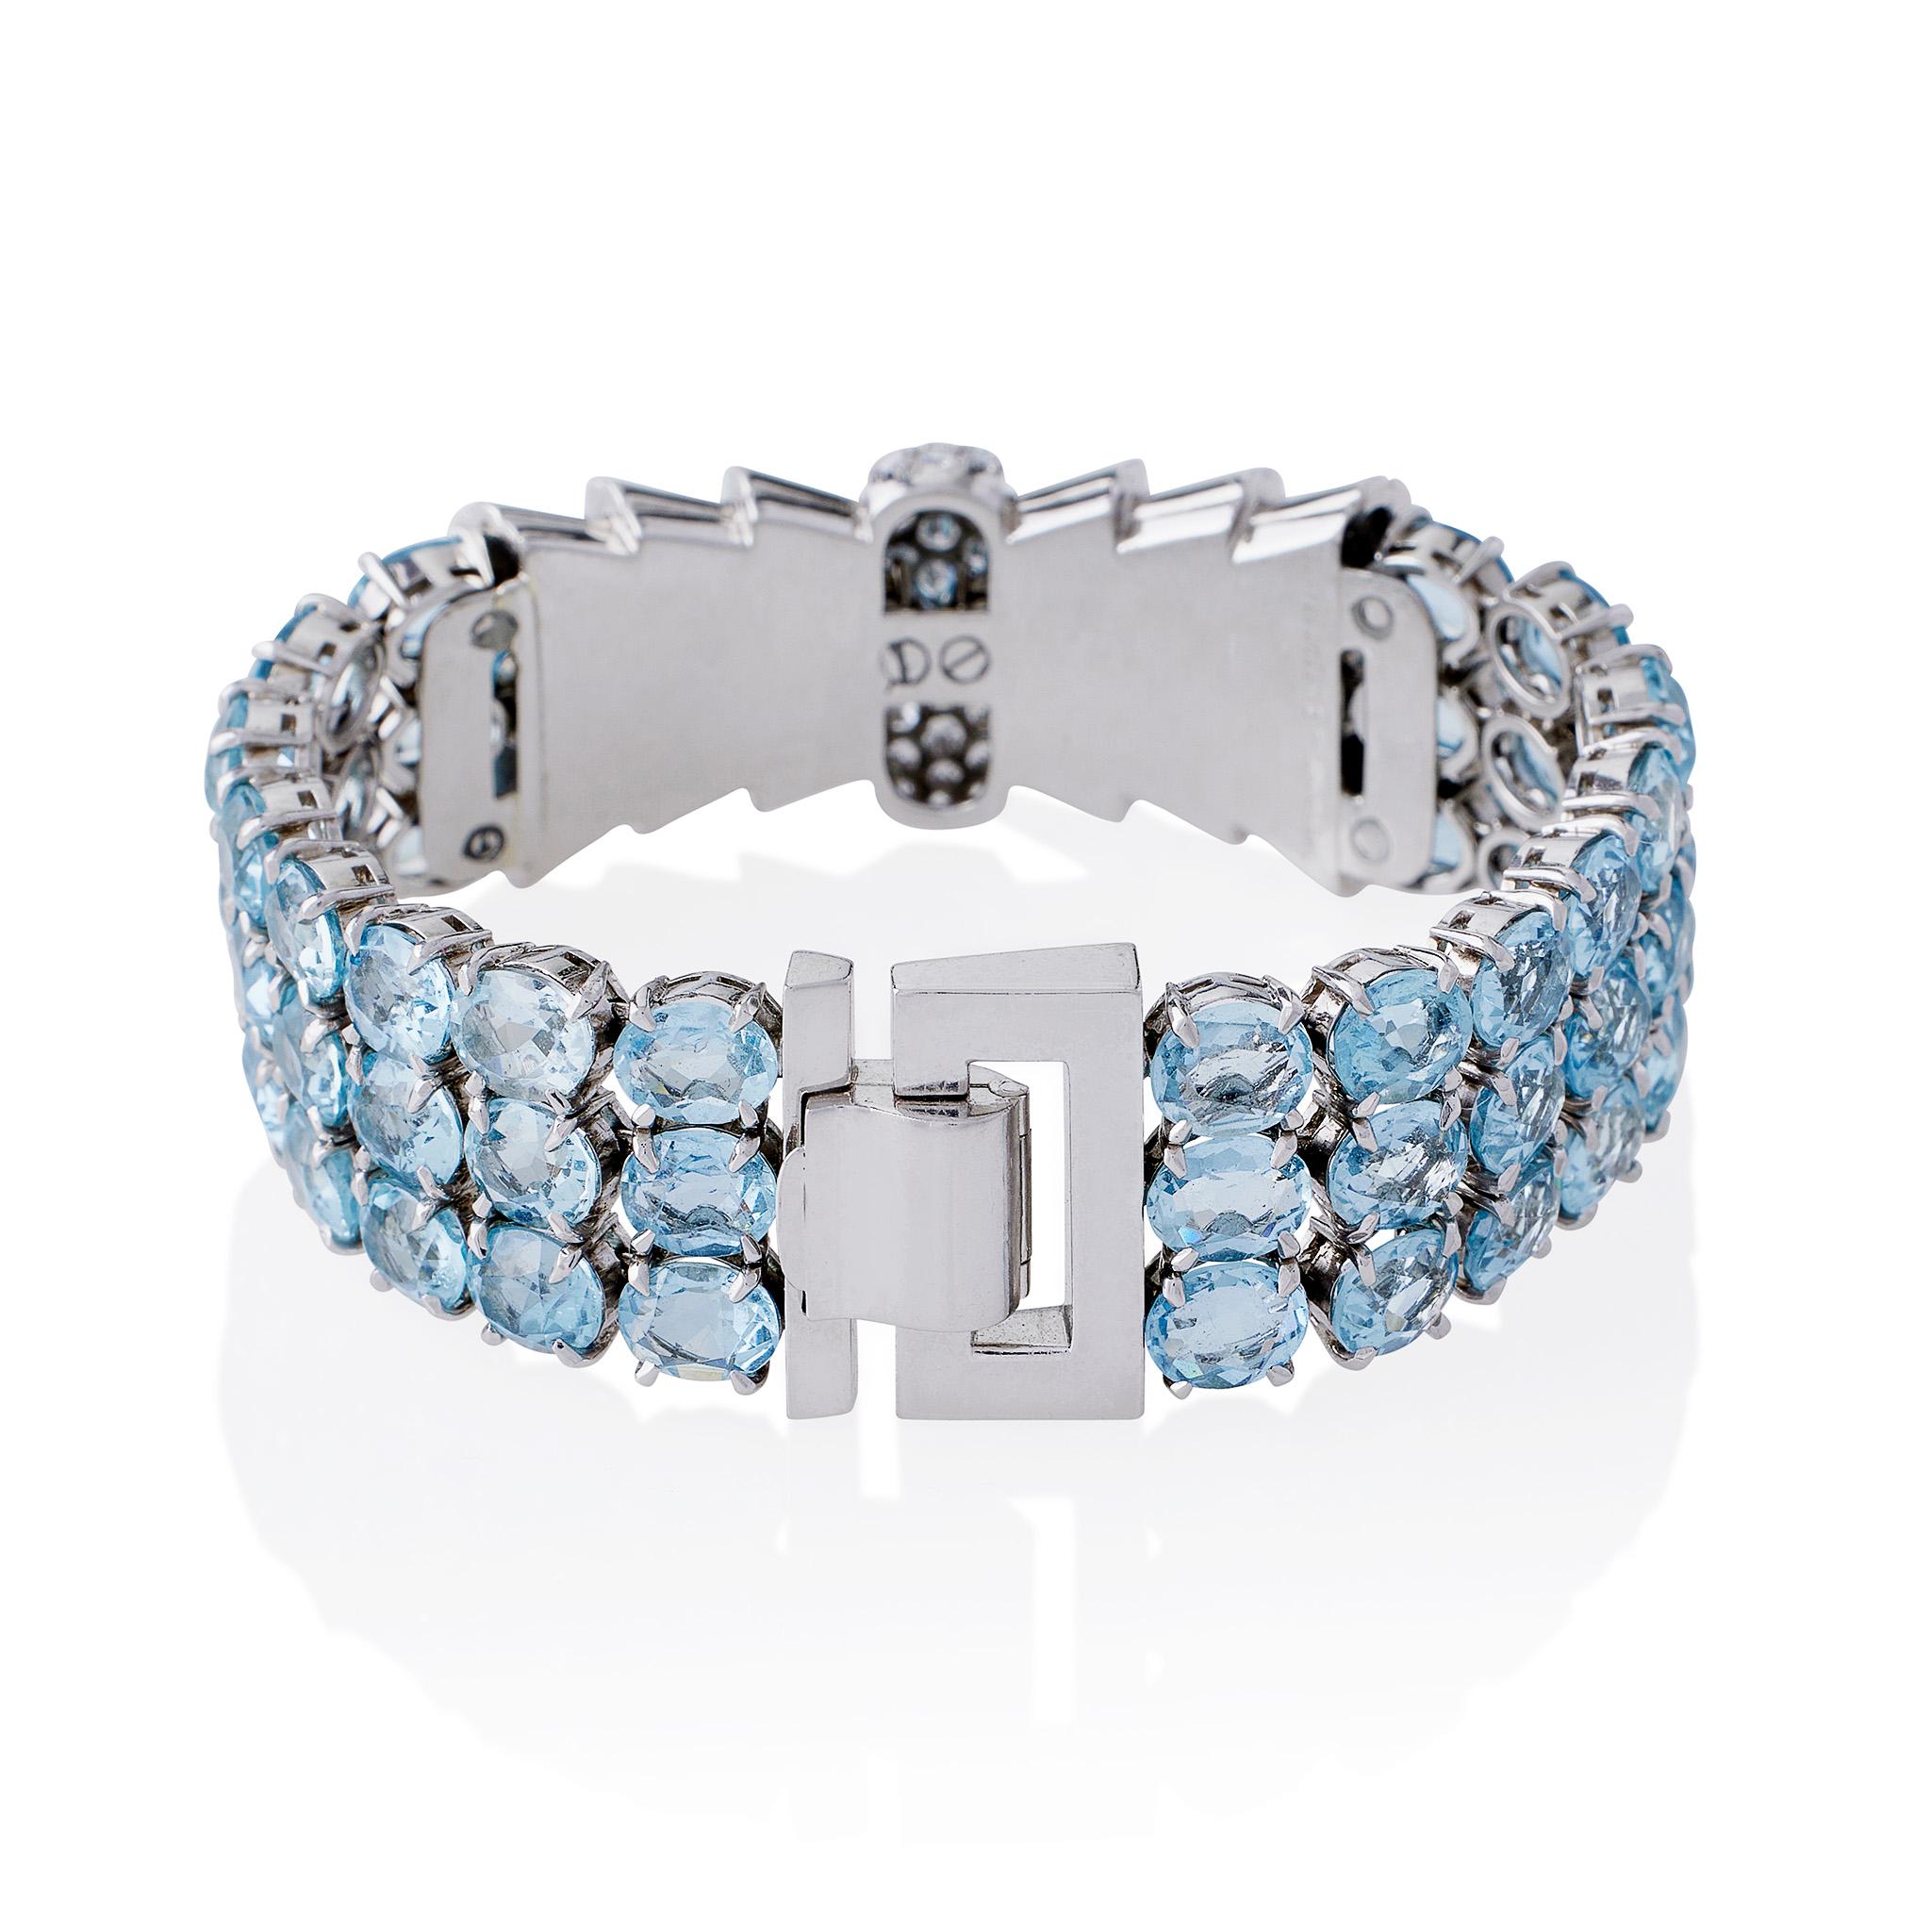 Dating from the 1930s, this Tiffany & Co. aquamarine and diamond bracelet was made in France. It is designed as strap of flexible oval-cut aquamarines, approximate total weight 32.40 carats, centering a stepped platinum ribbon bow with pavé-set